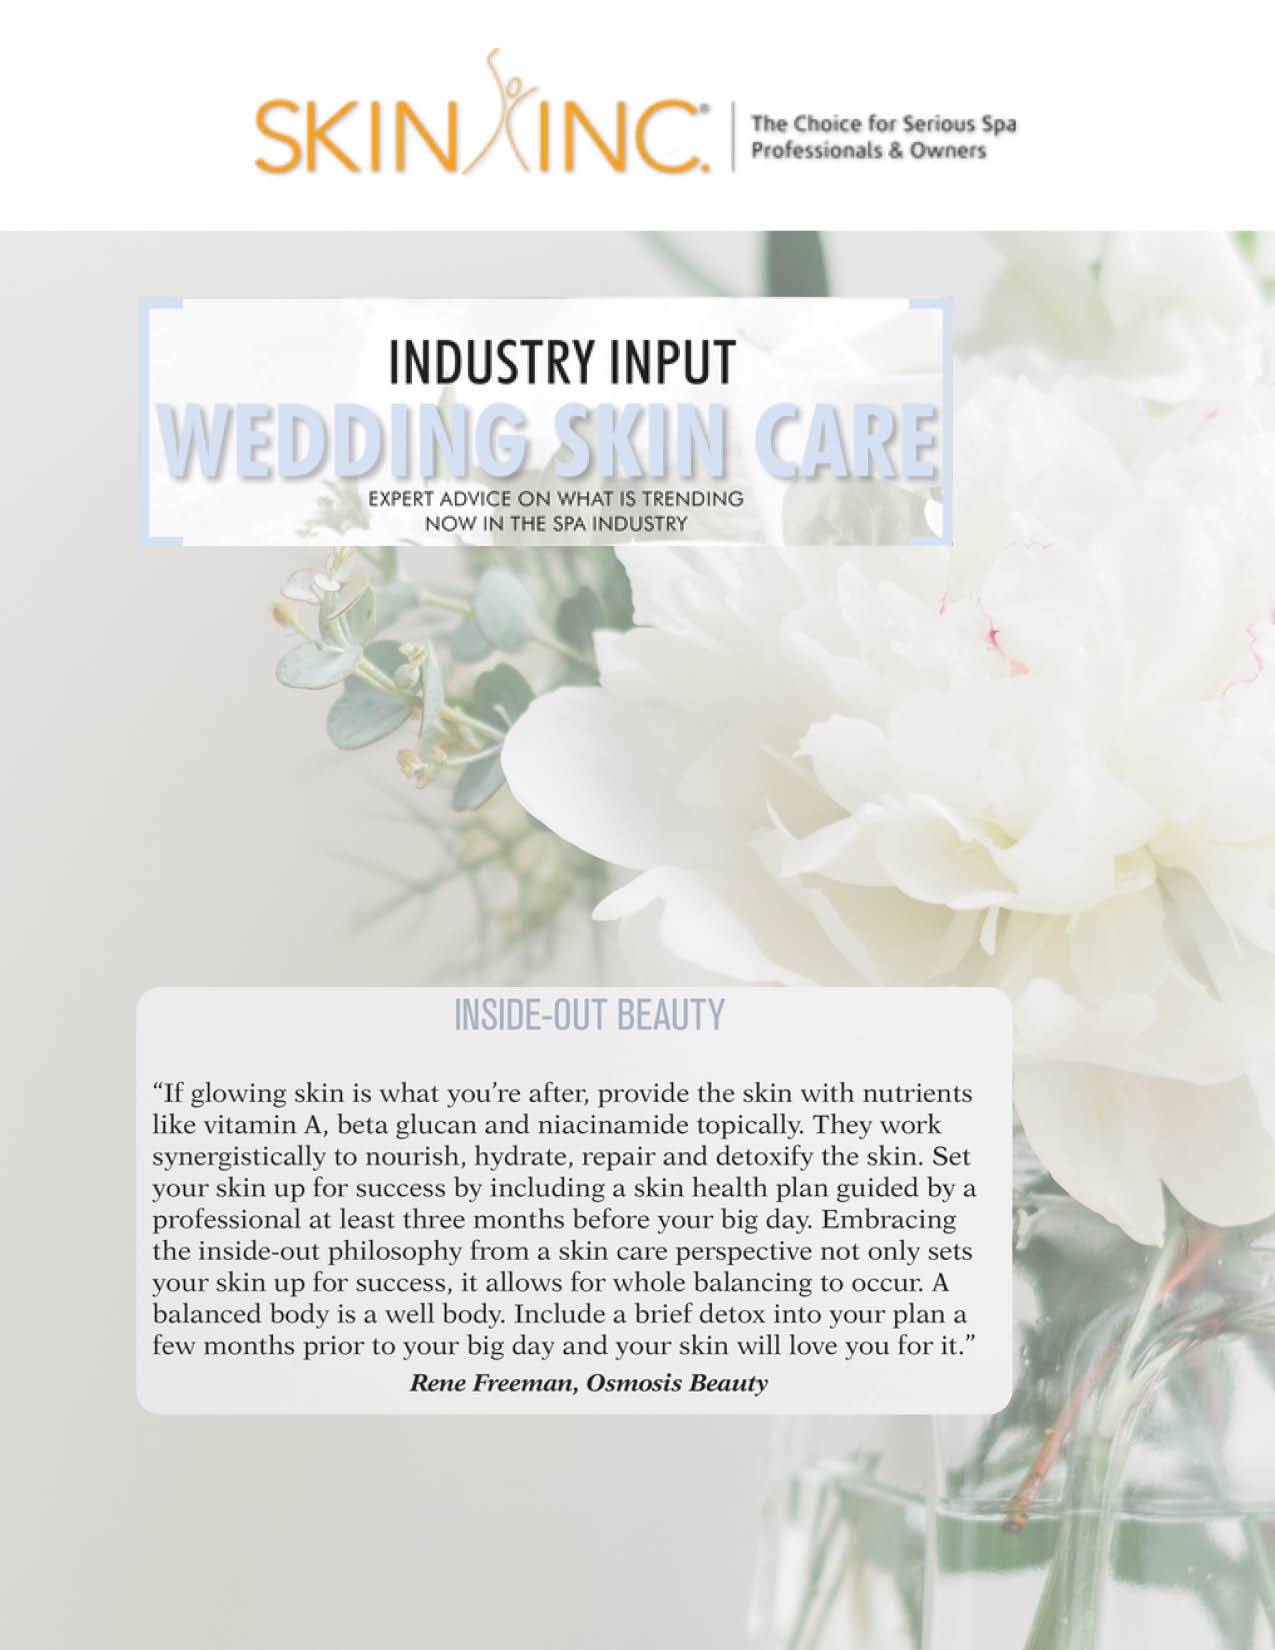 Osmosis Educator was quoted in a story about wedding skin care tips in the July issue of Skin Inc